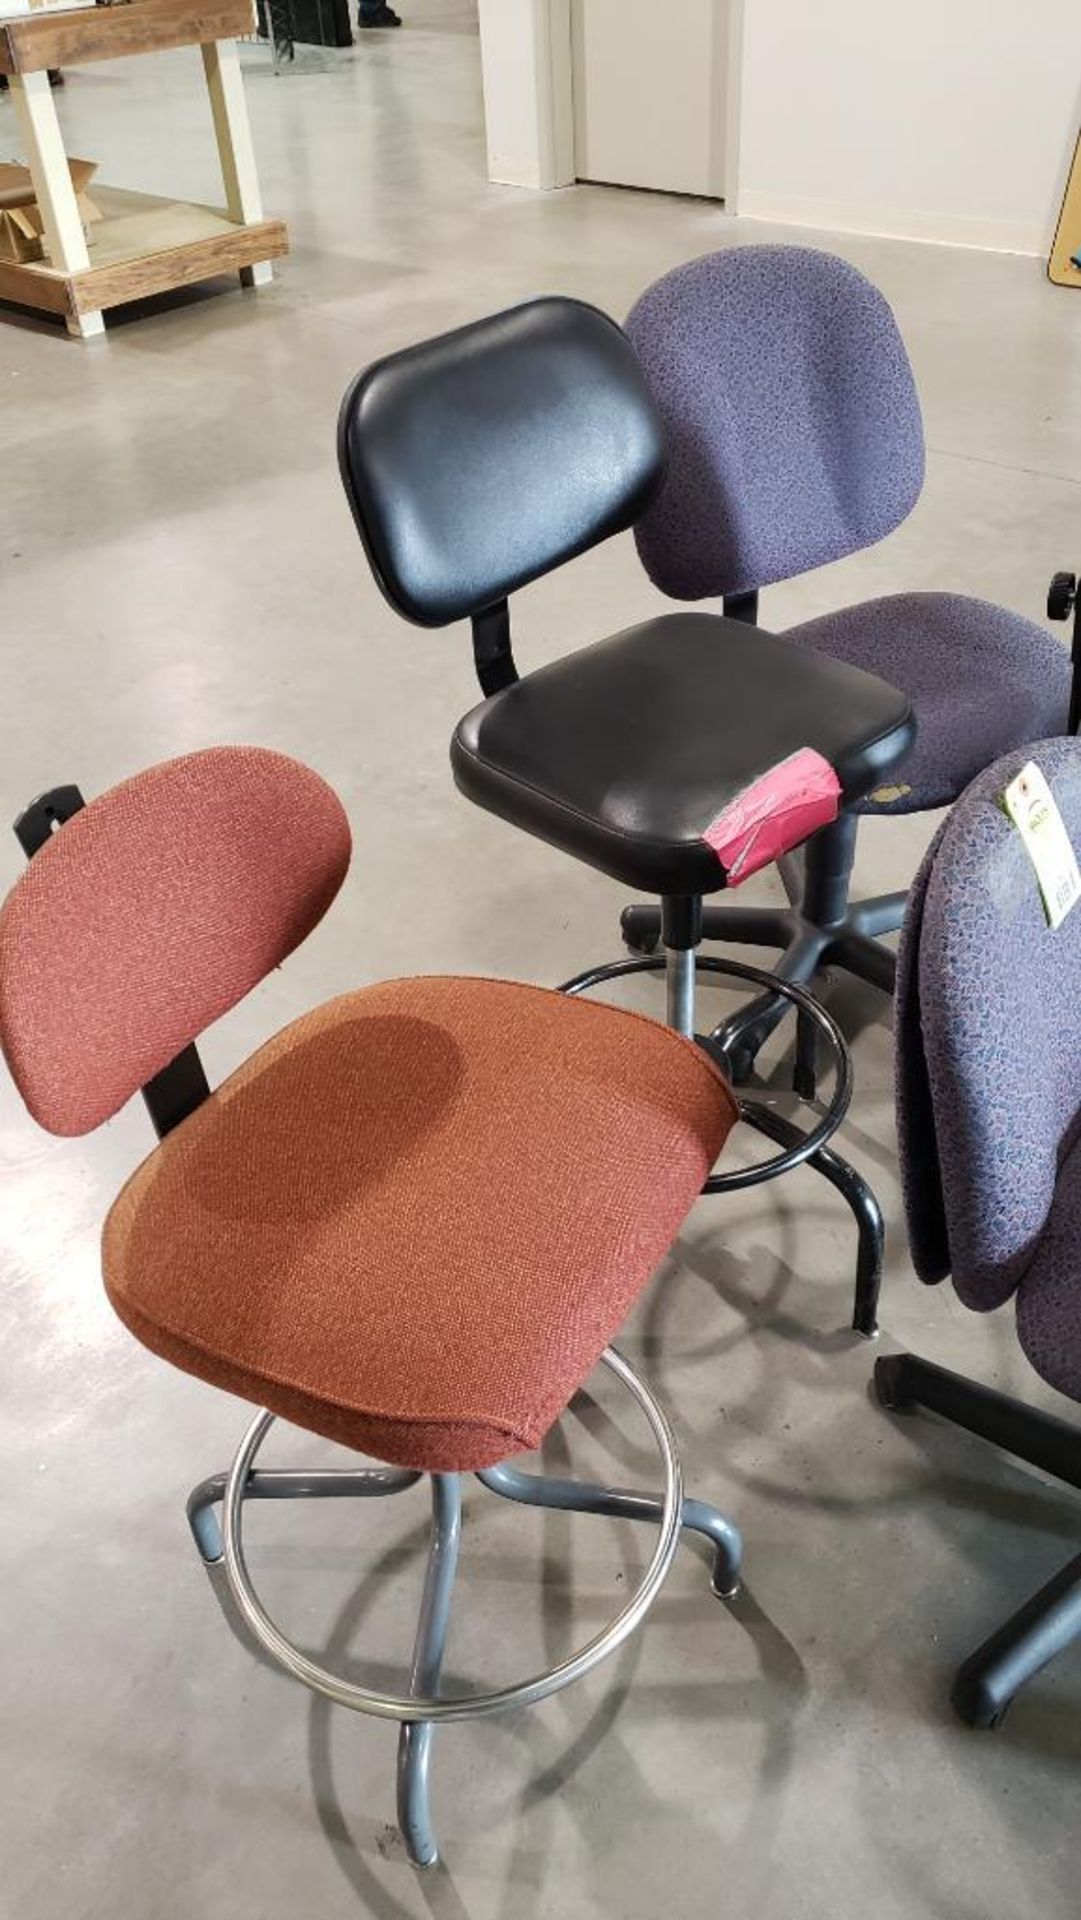 Qty 5 - Assorted chairs. - Image 2 of 3